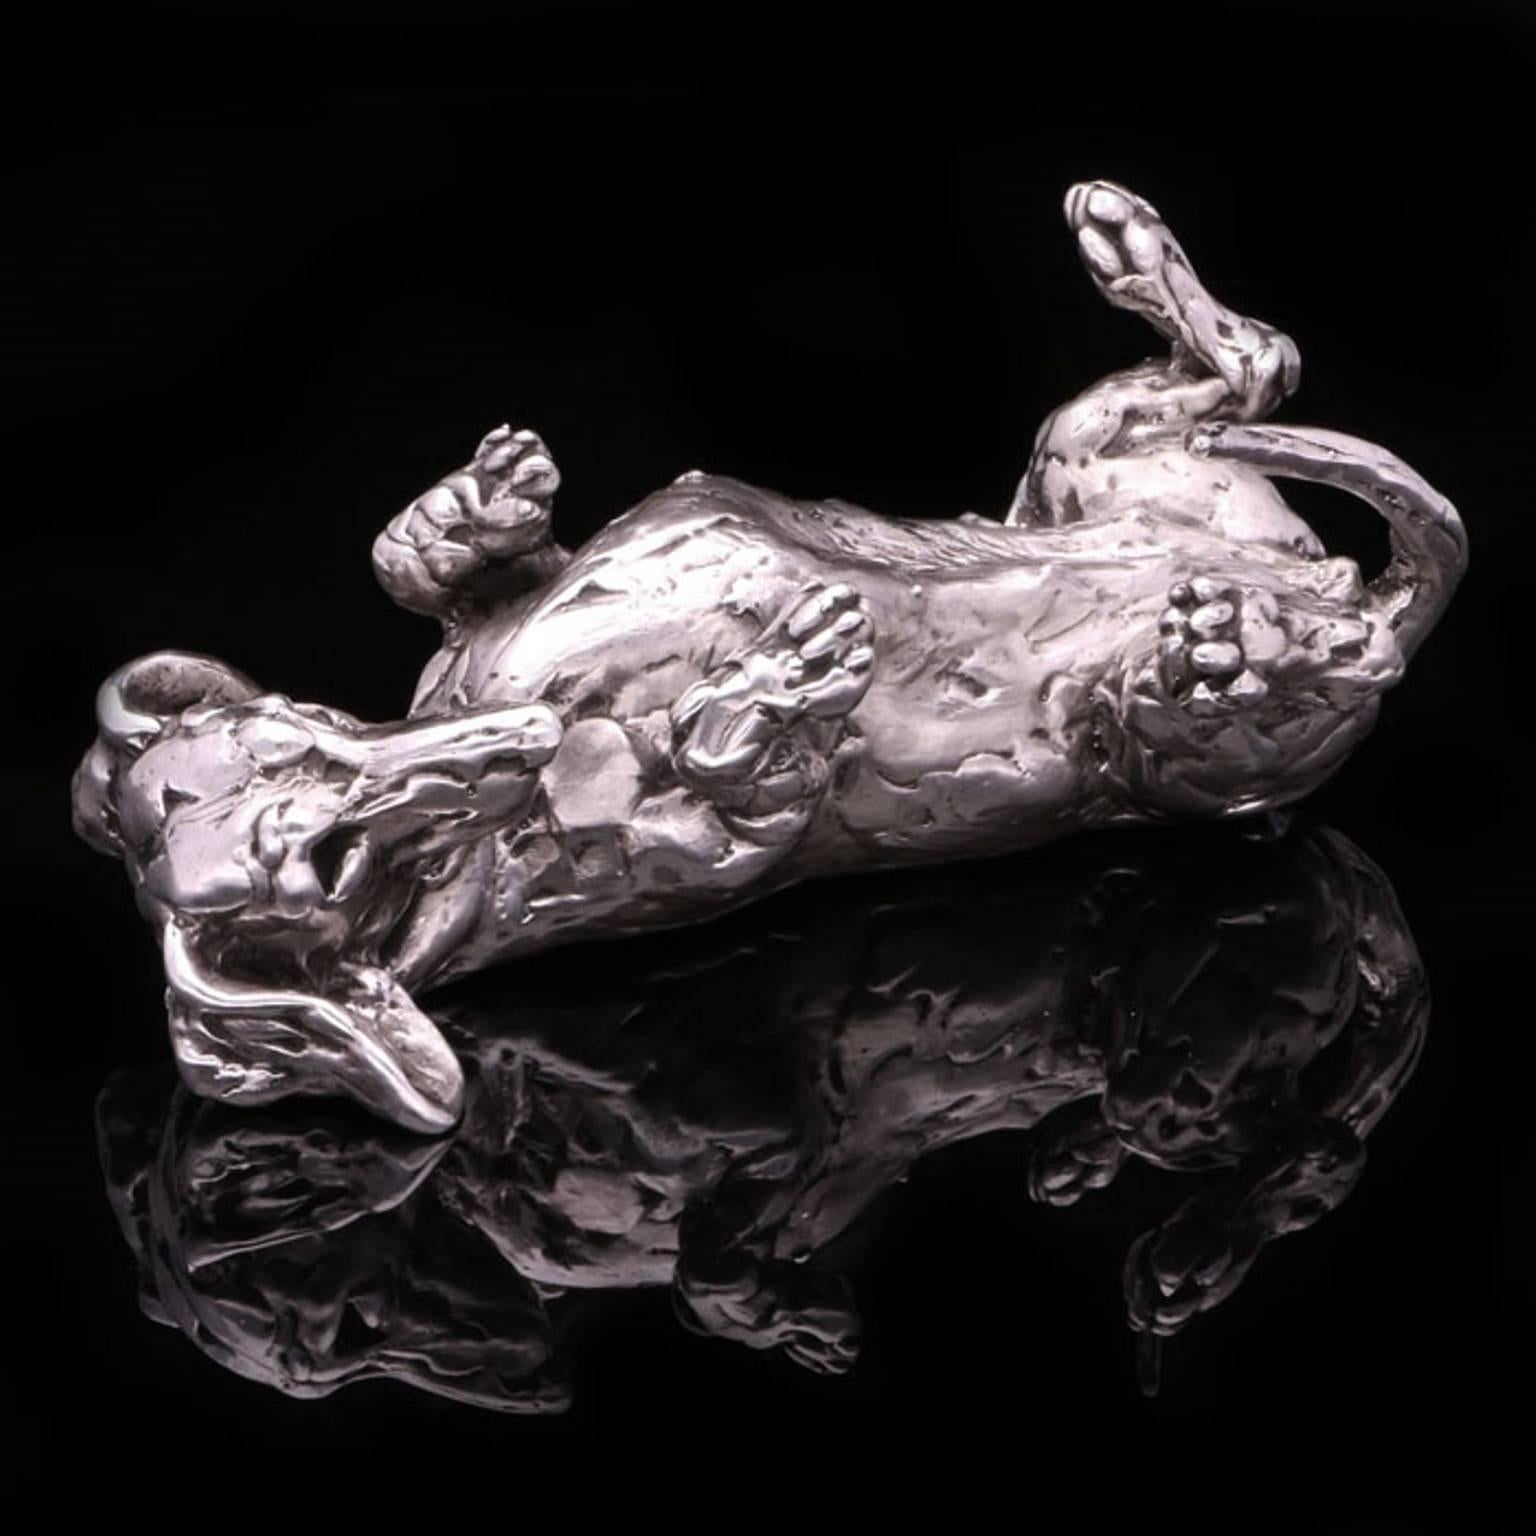 Lucy Kinsella Figurative Sculpture - 'Rolling terrier' sterling silver sculpture